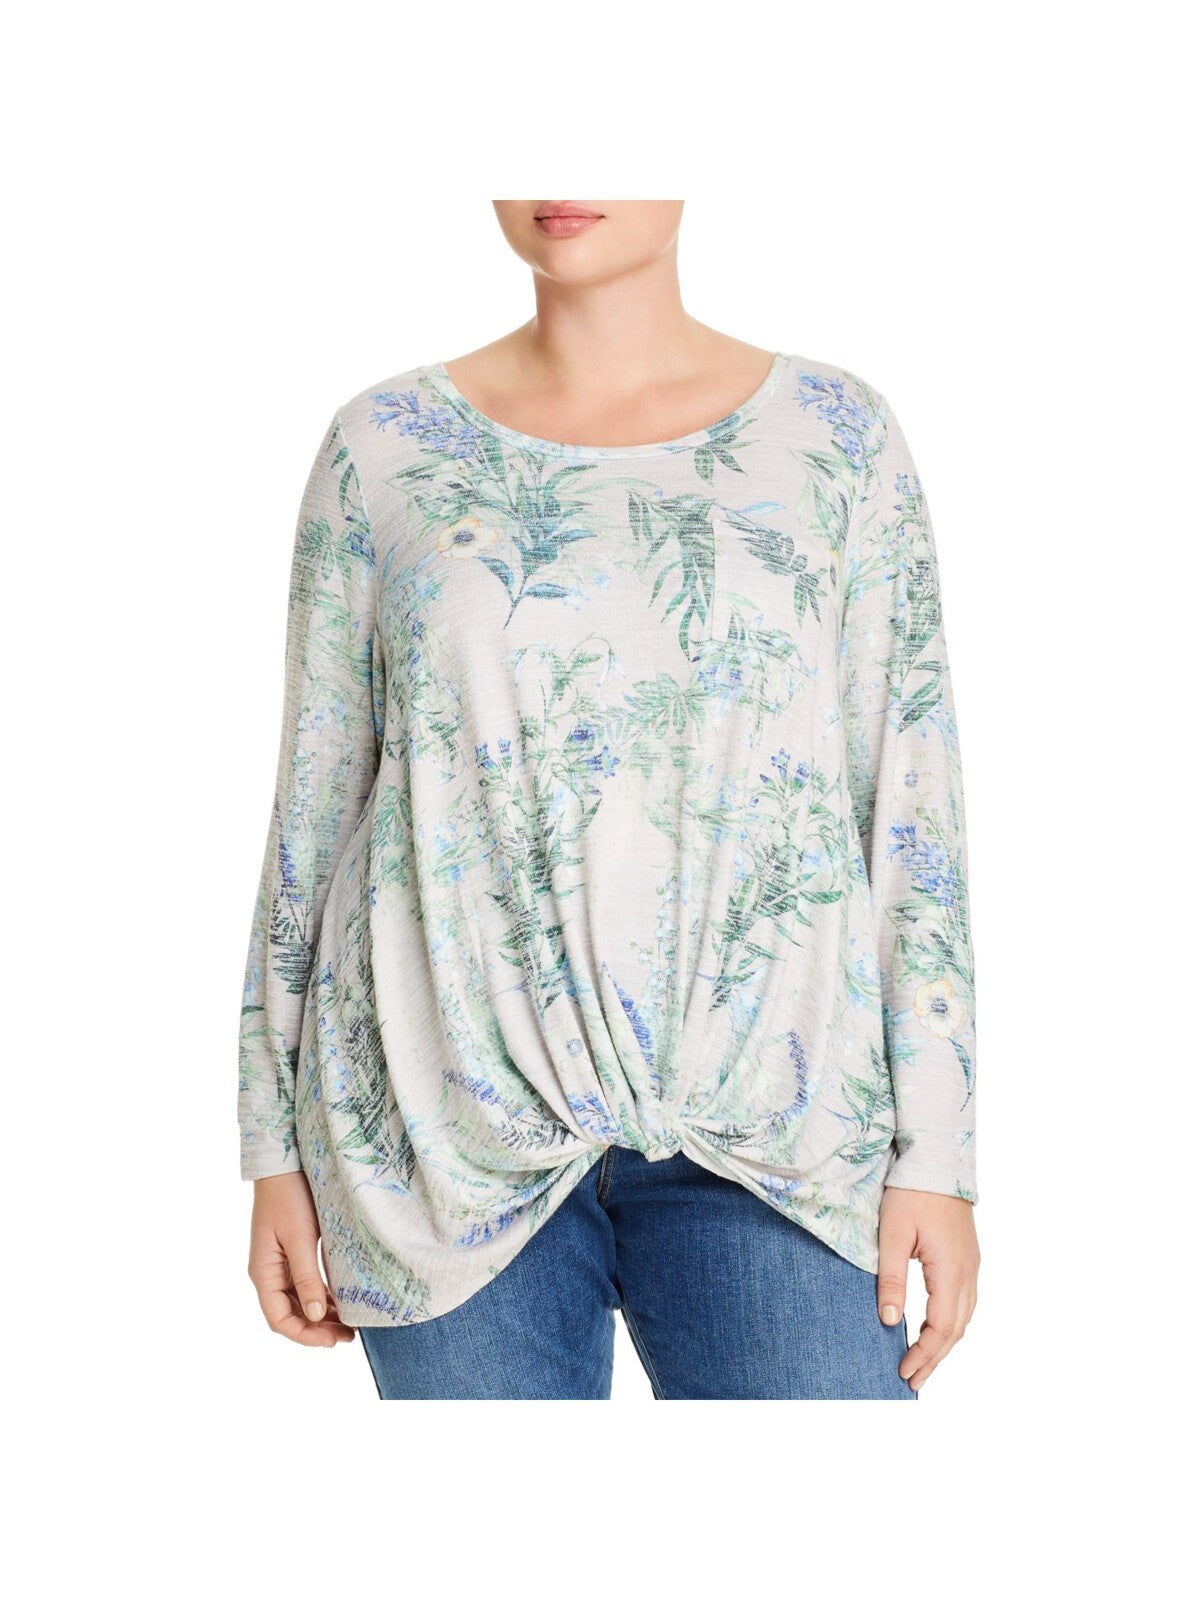 CUPIO BLUSH Womens Beige Stretch Twist Front Pocketed Floral Long Sleeve Round Neck Top Plus 2X